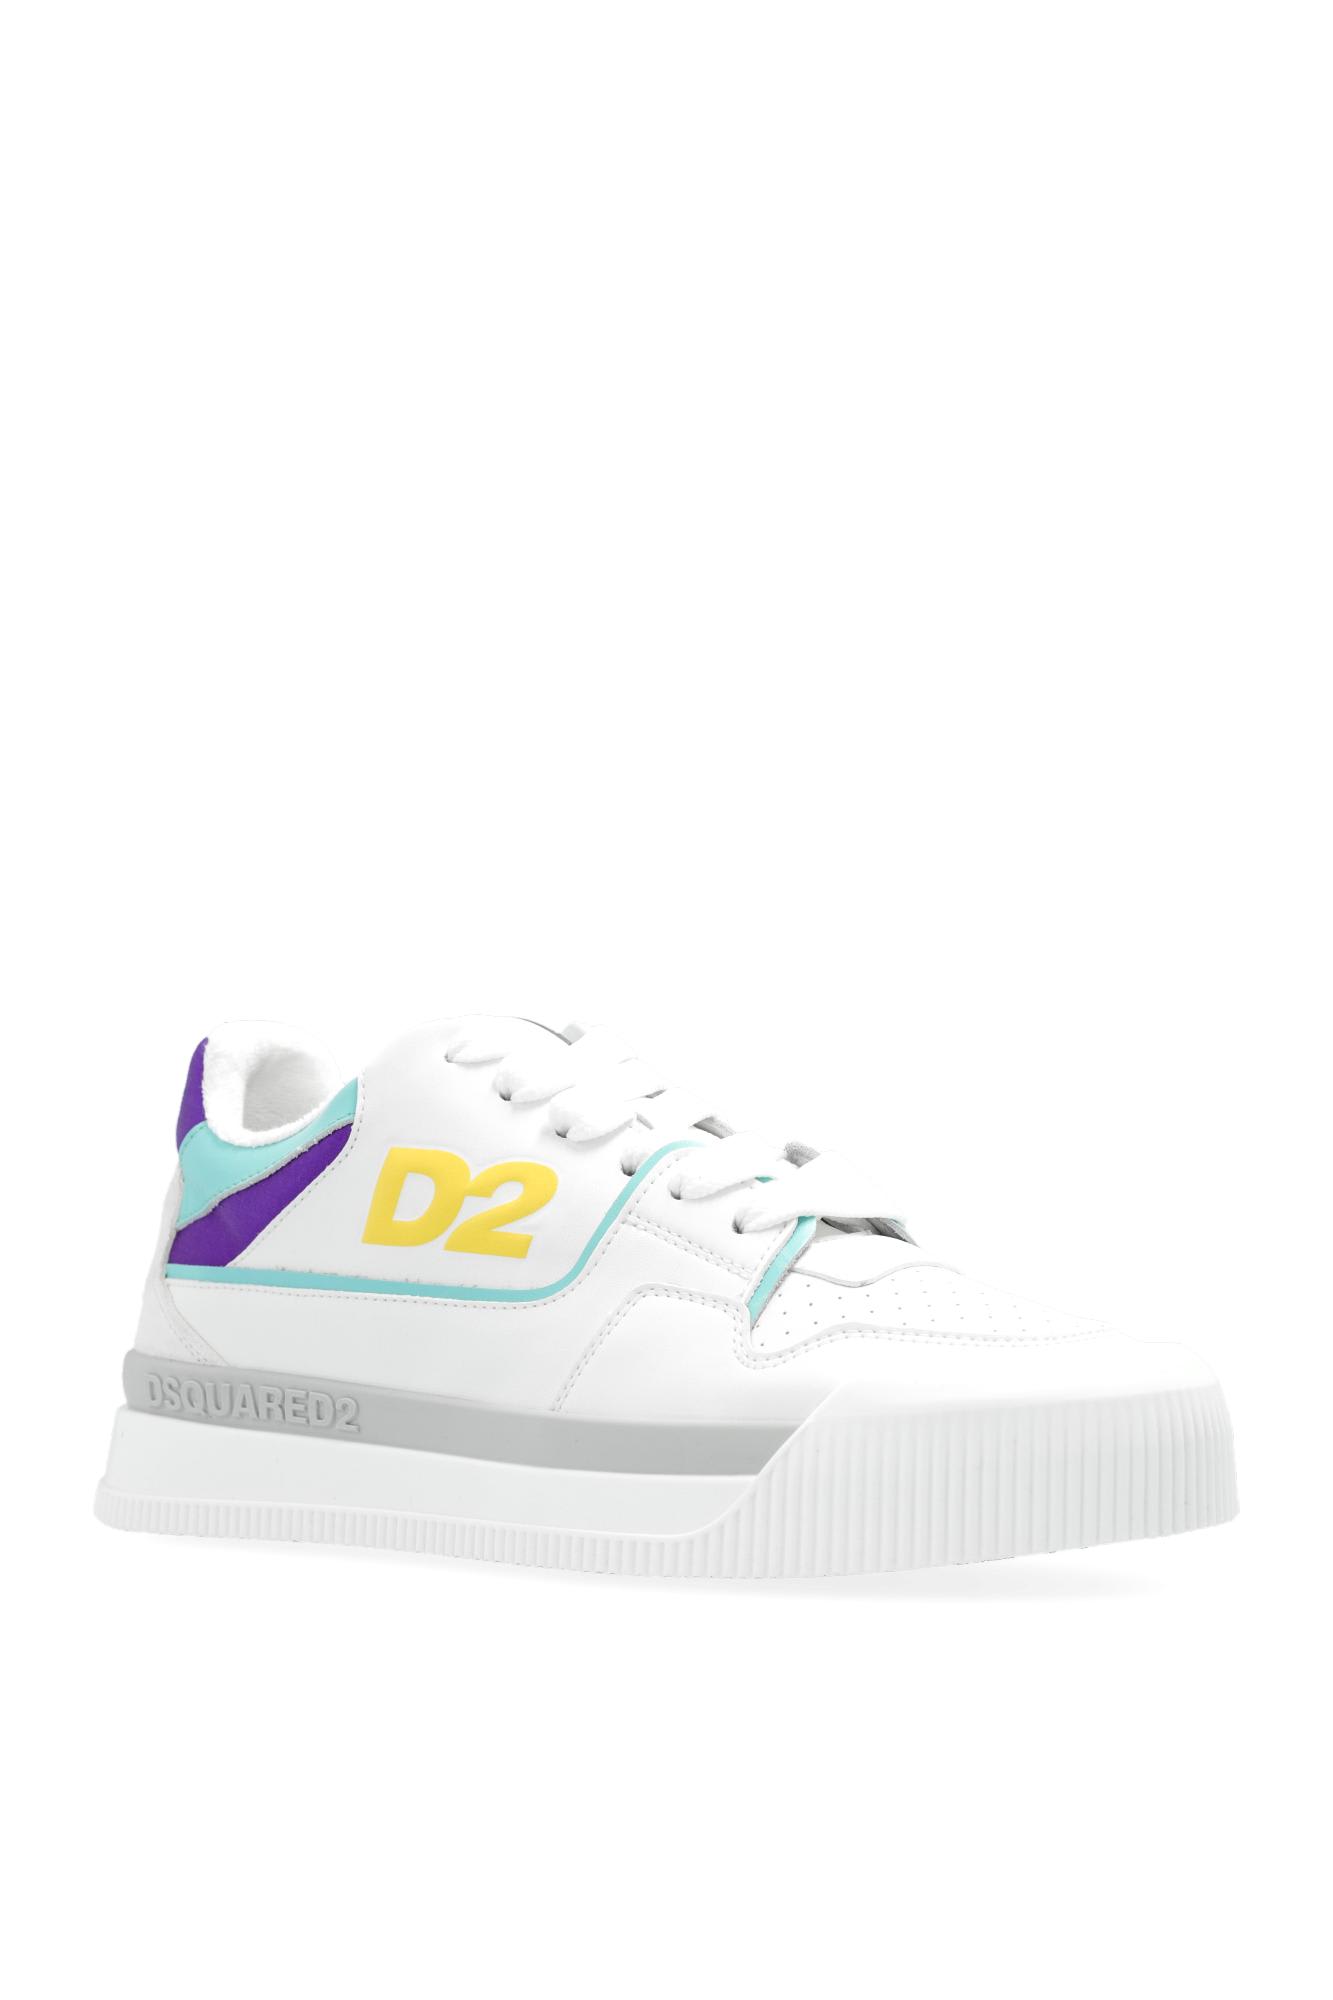 Shop Dsquared2 New Jersey Sneakers In White Yellow Purple (white)